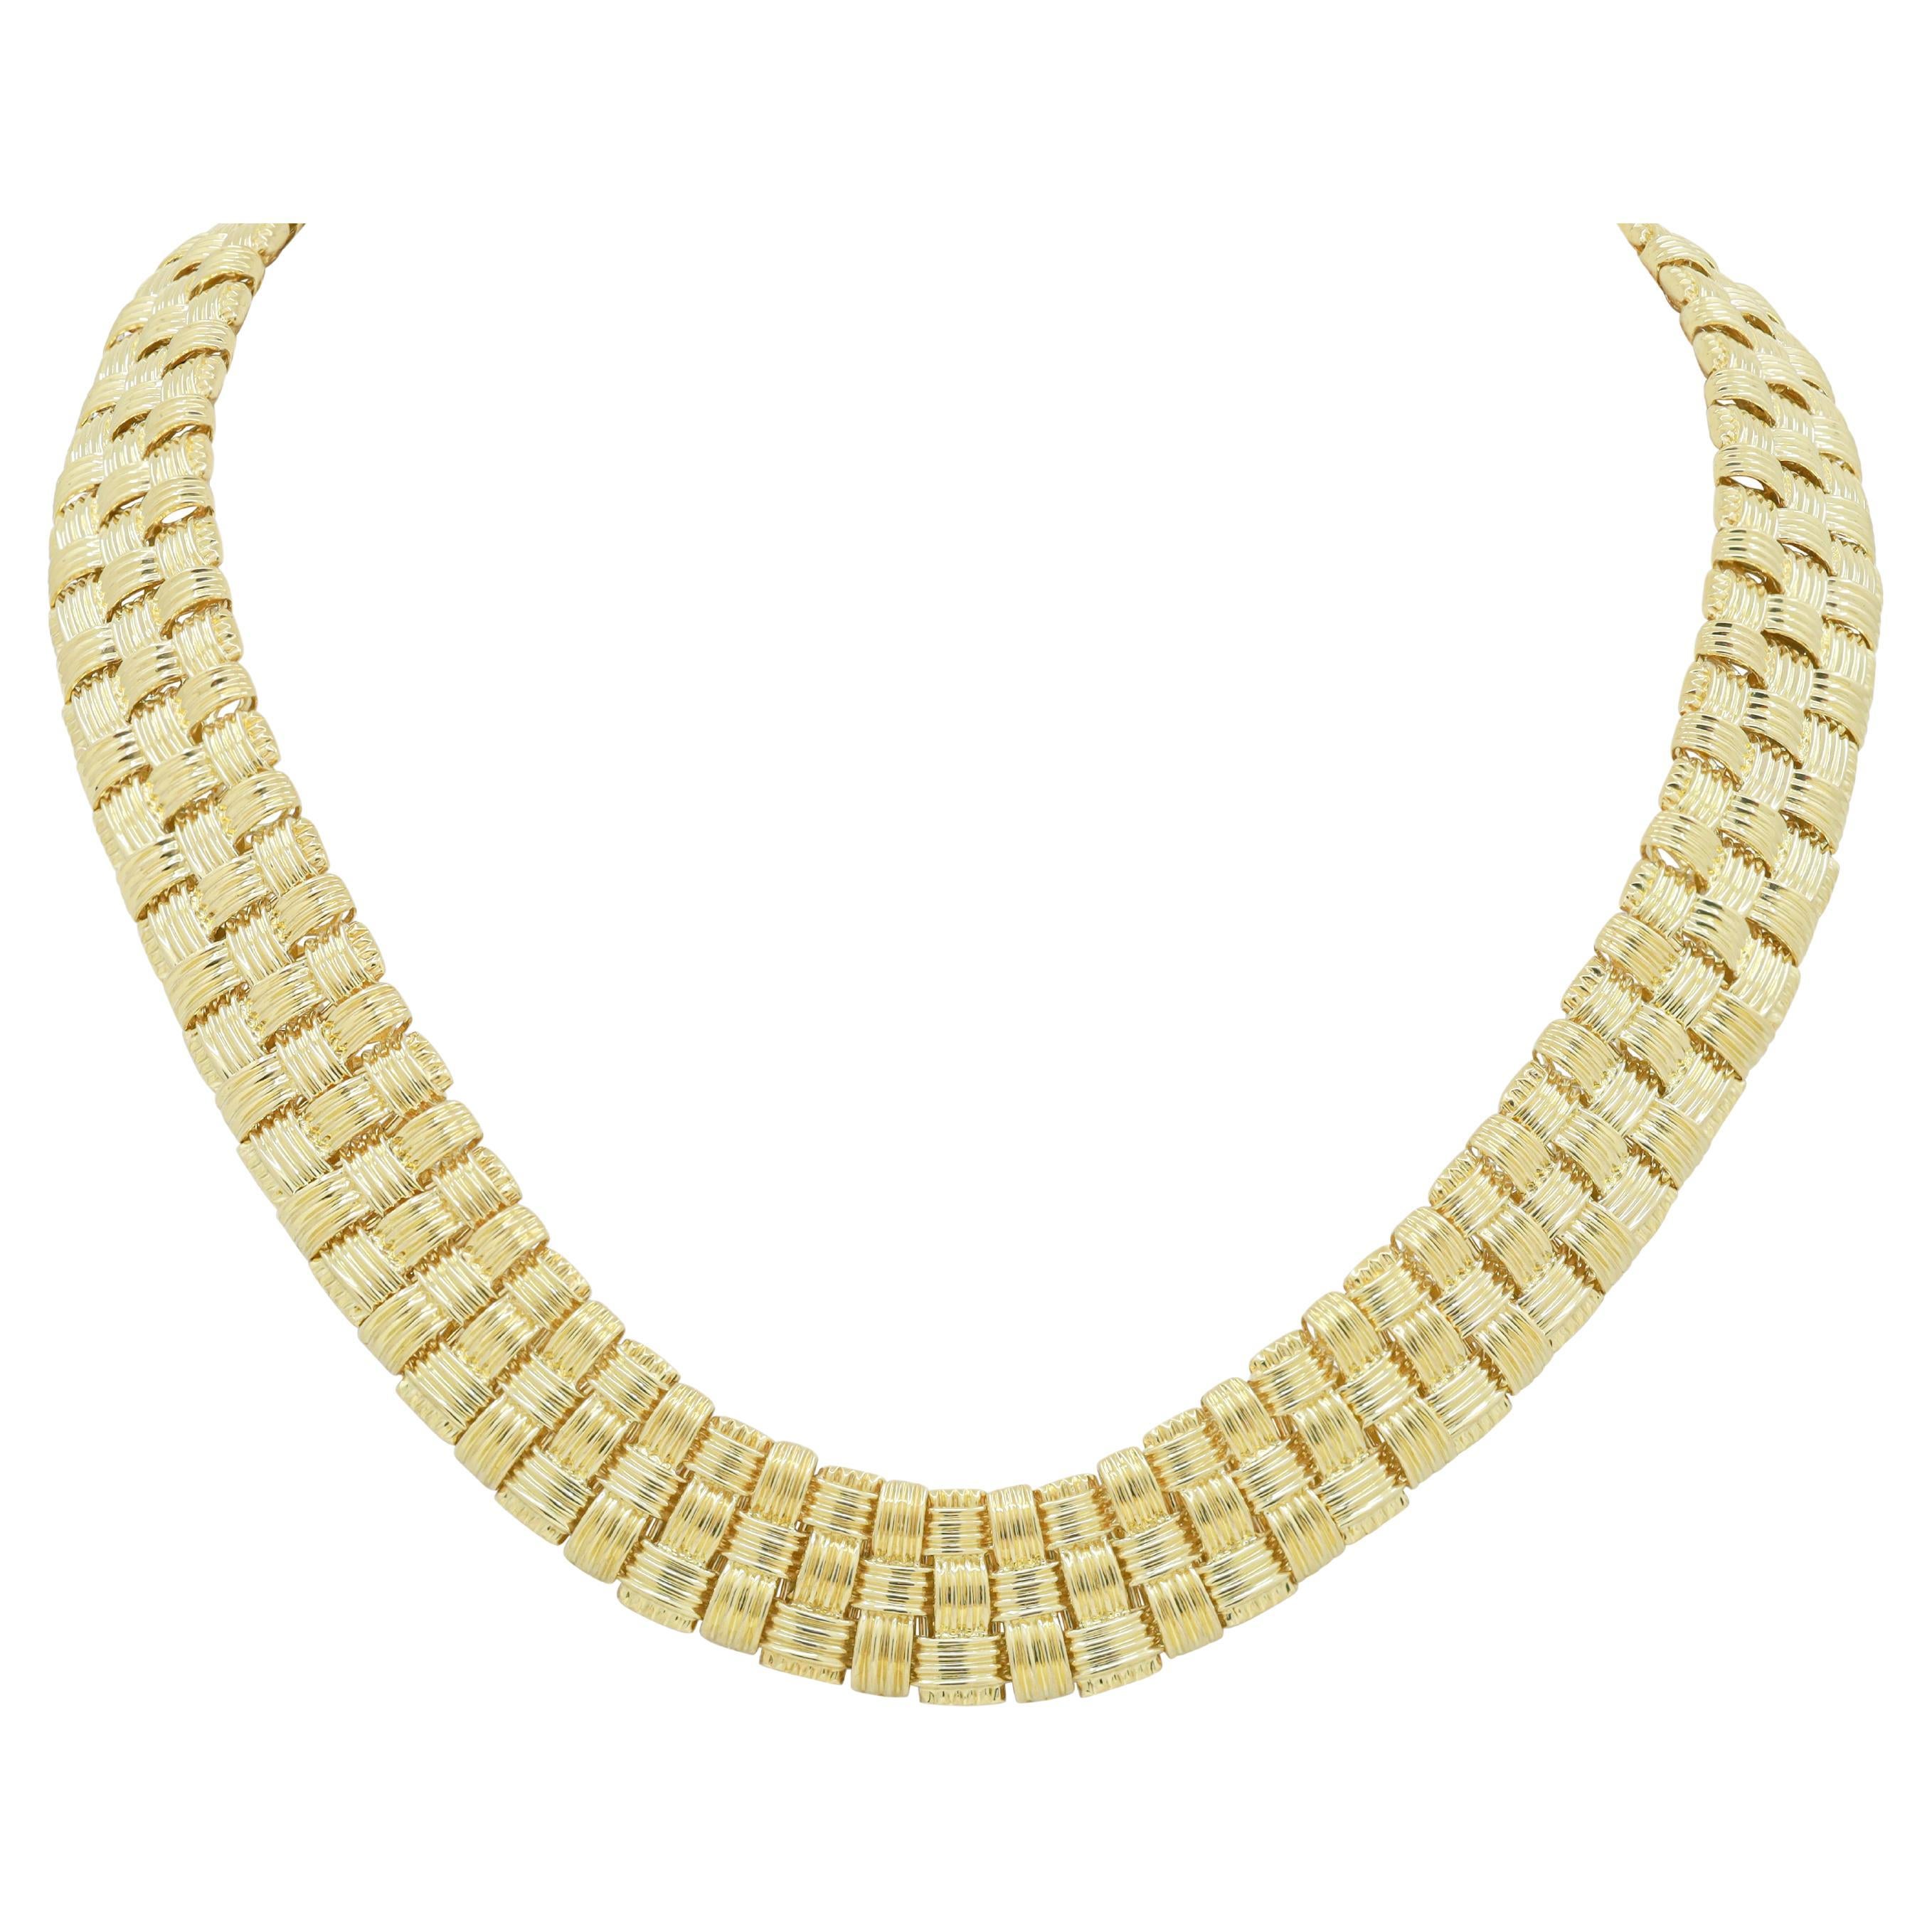  18kt Roberto Coin Necklace Woven Design  For Sale